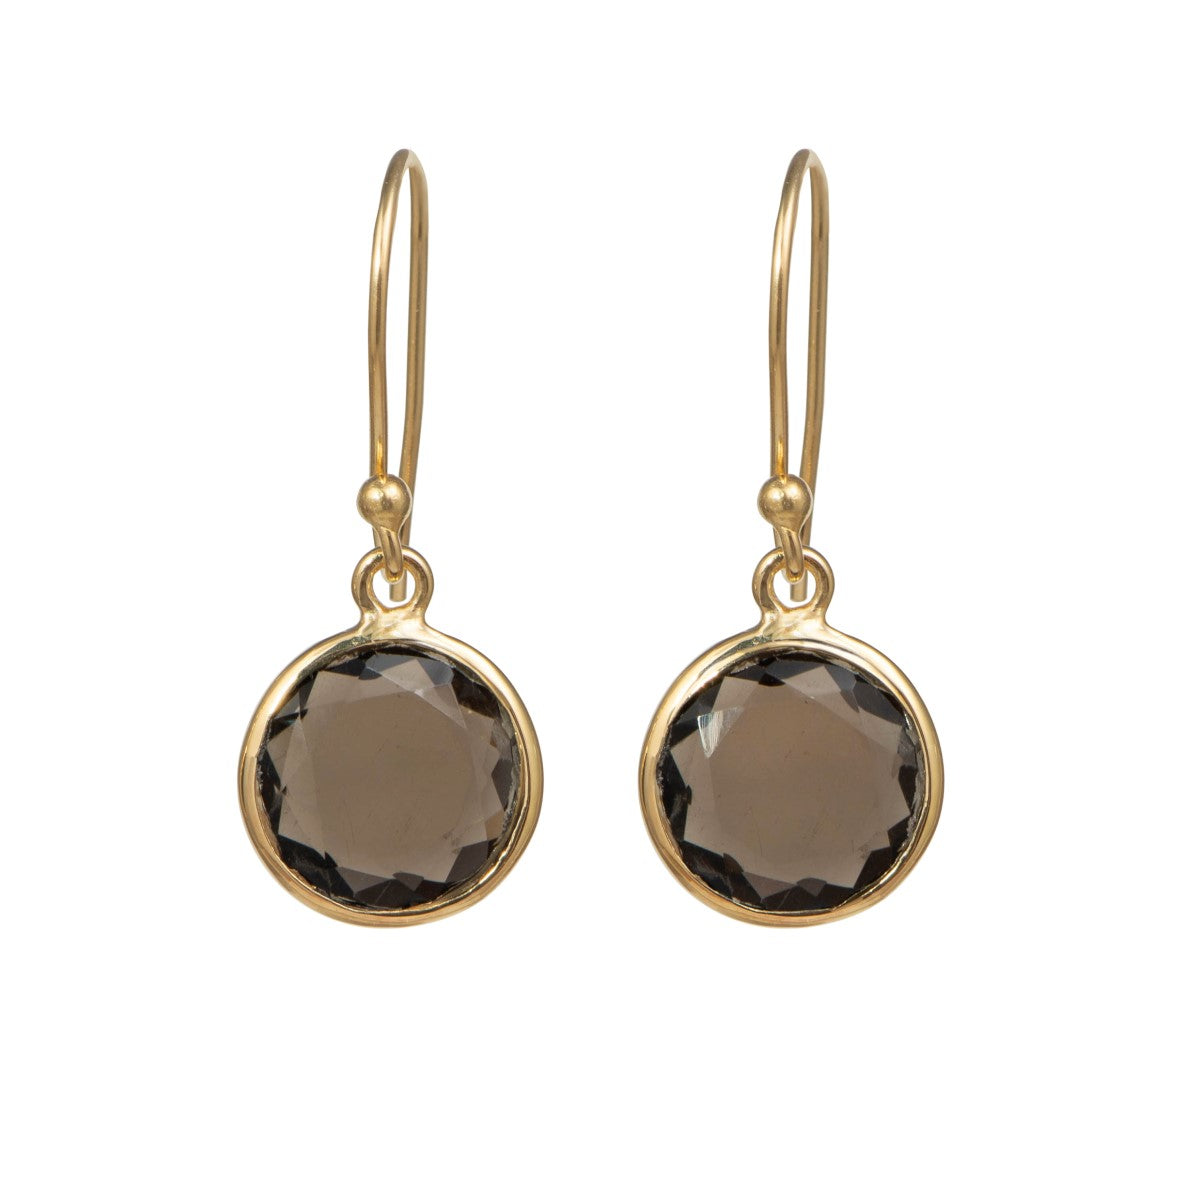 Smoky Quartz Gold Plated Sterling Silver Earrings with a Round Faceted Gemstone Drop